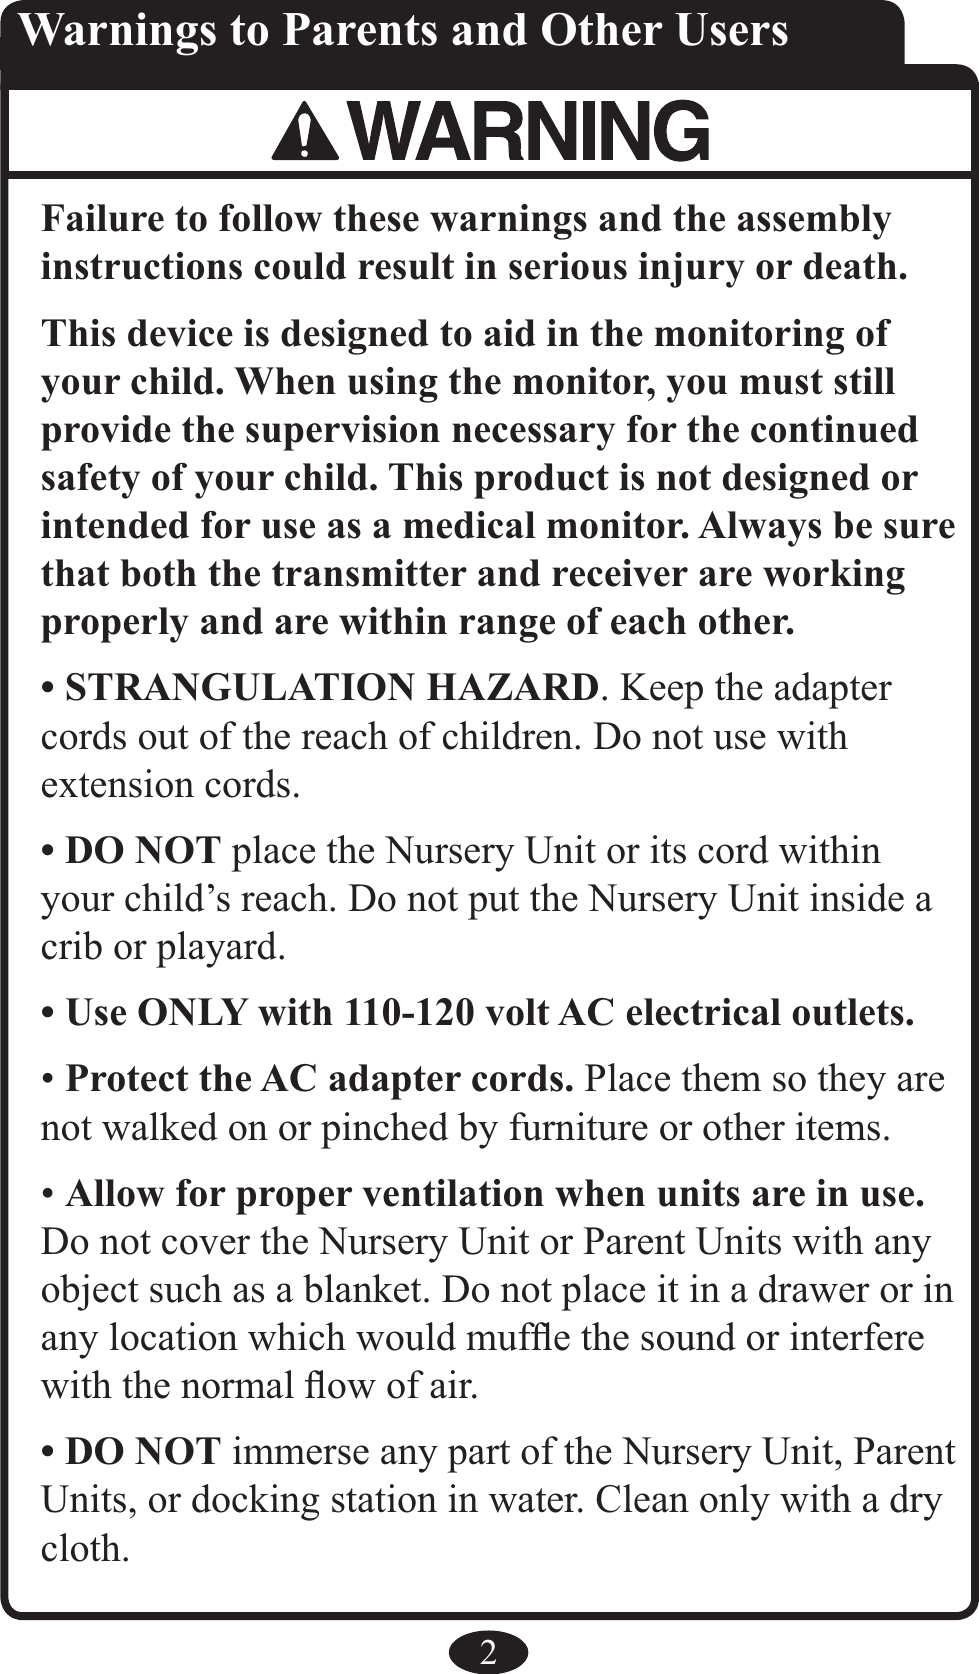 2Failure to follow these warnings and the assembly instructions could result in serious injury or death.This device is designed to aid in the monitoring of your child. When using the monitor, you must still provide the supervision necessary for the continued safety of your child. This product is not designed or intended for use as a medical monitor. Always be sure that both the transmitter and receiver are working properly and are within range of each other.• STRANGULATION HAZARD. Keep the adapter cords out of the reach of children. Do not use with extension cords. • DO NOT place the Nursery Unit or its cord within your child’s reach. Do not put the Nursery Unit inside a crib or playard. • Use ONLY with 110-120 volt AC electrical outlets. • Protect the AC adapter cords. Place them so they are not walked on or pinched by furniture or other items. • Allow for proper ventilation when units are in use. Do not cover the Nursery Unit or Parent Units with any object such as a blanket. Do not place it in a drawer or in any location which would mufﬂe the sound or interfere with the normal ﬂow of air. • DO NOT immerse any part of the Nursery Unit, Parent Units, or docking station in water. Clean only with a dry cloth. Warnings to Parents and Other Users